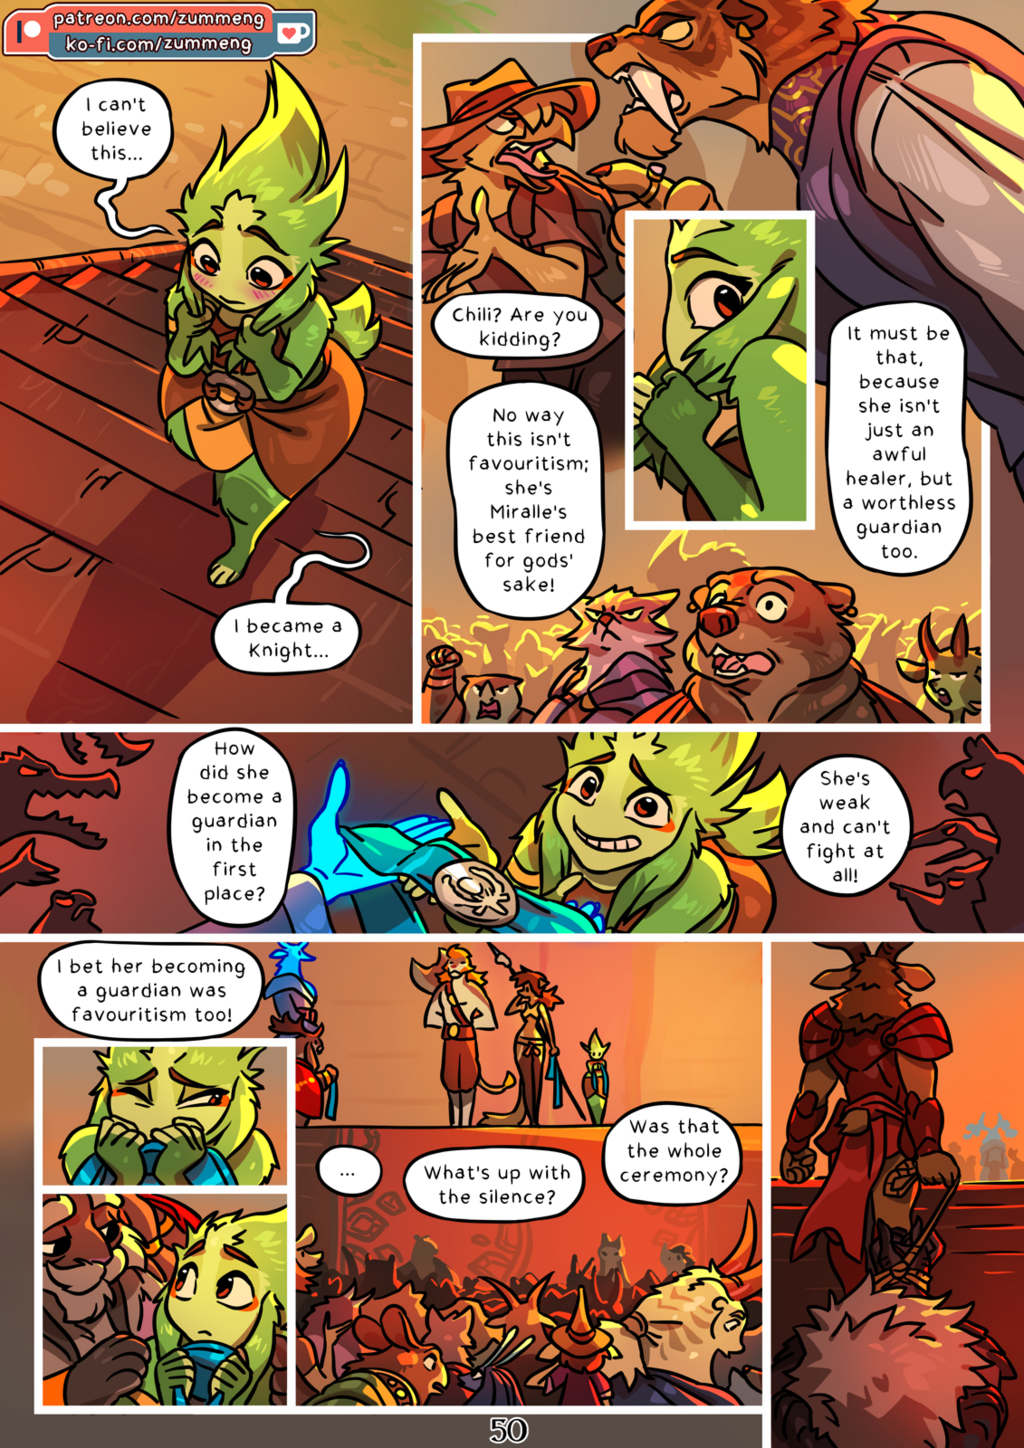 Tree of Life - Book 1 pg. 50.